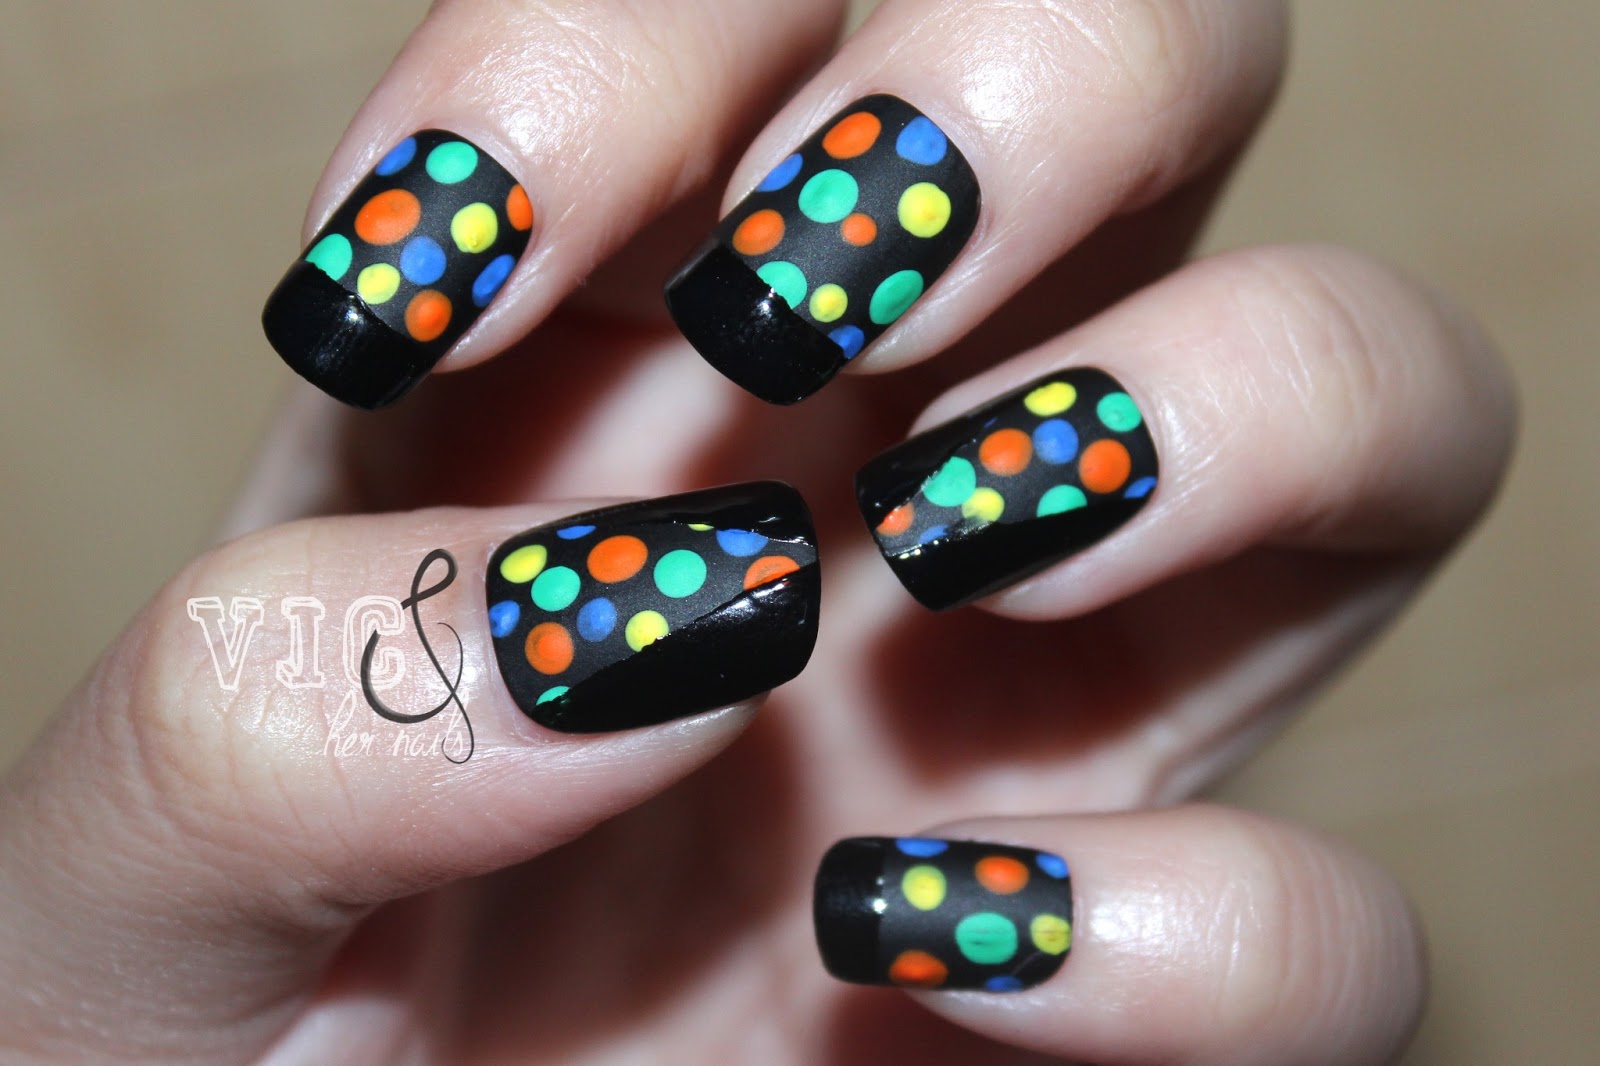 Vic and Her Nails: OMD Challenge Day 6 - Neon